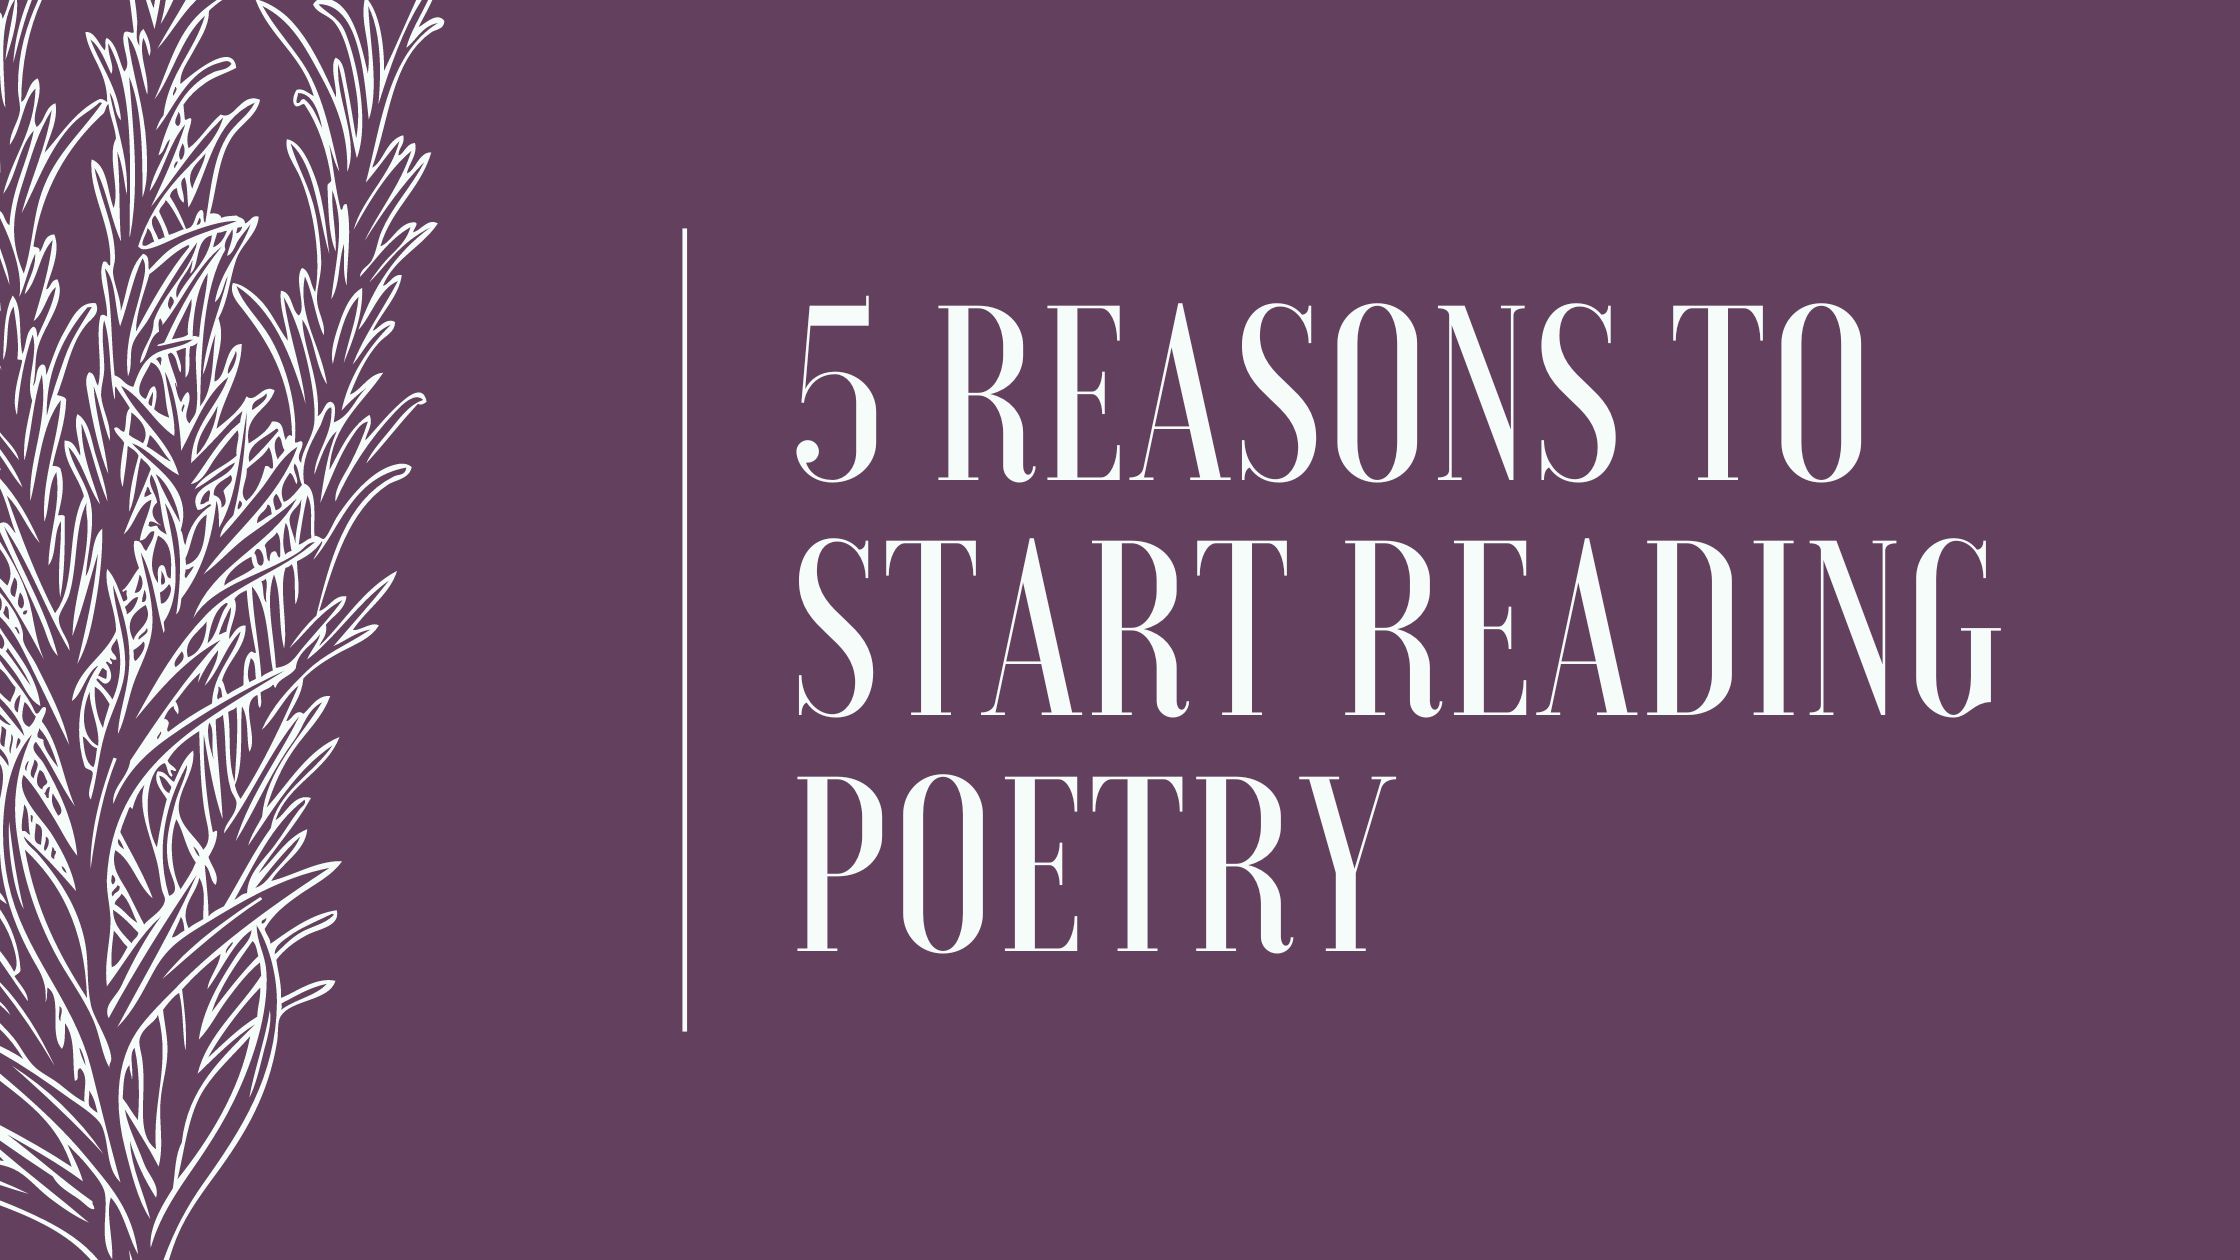 5 reasons to start reading poetry